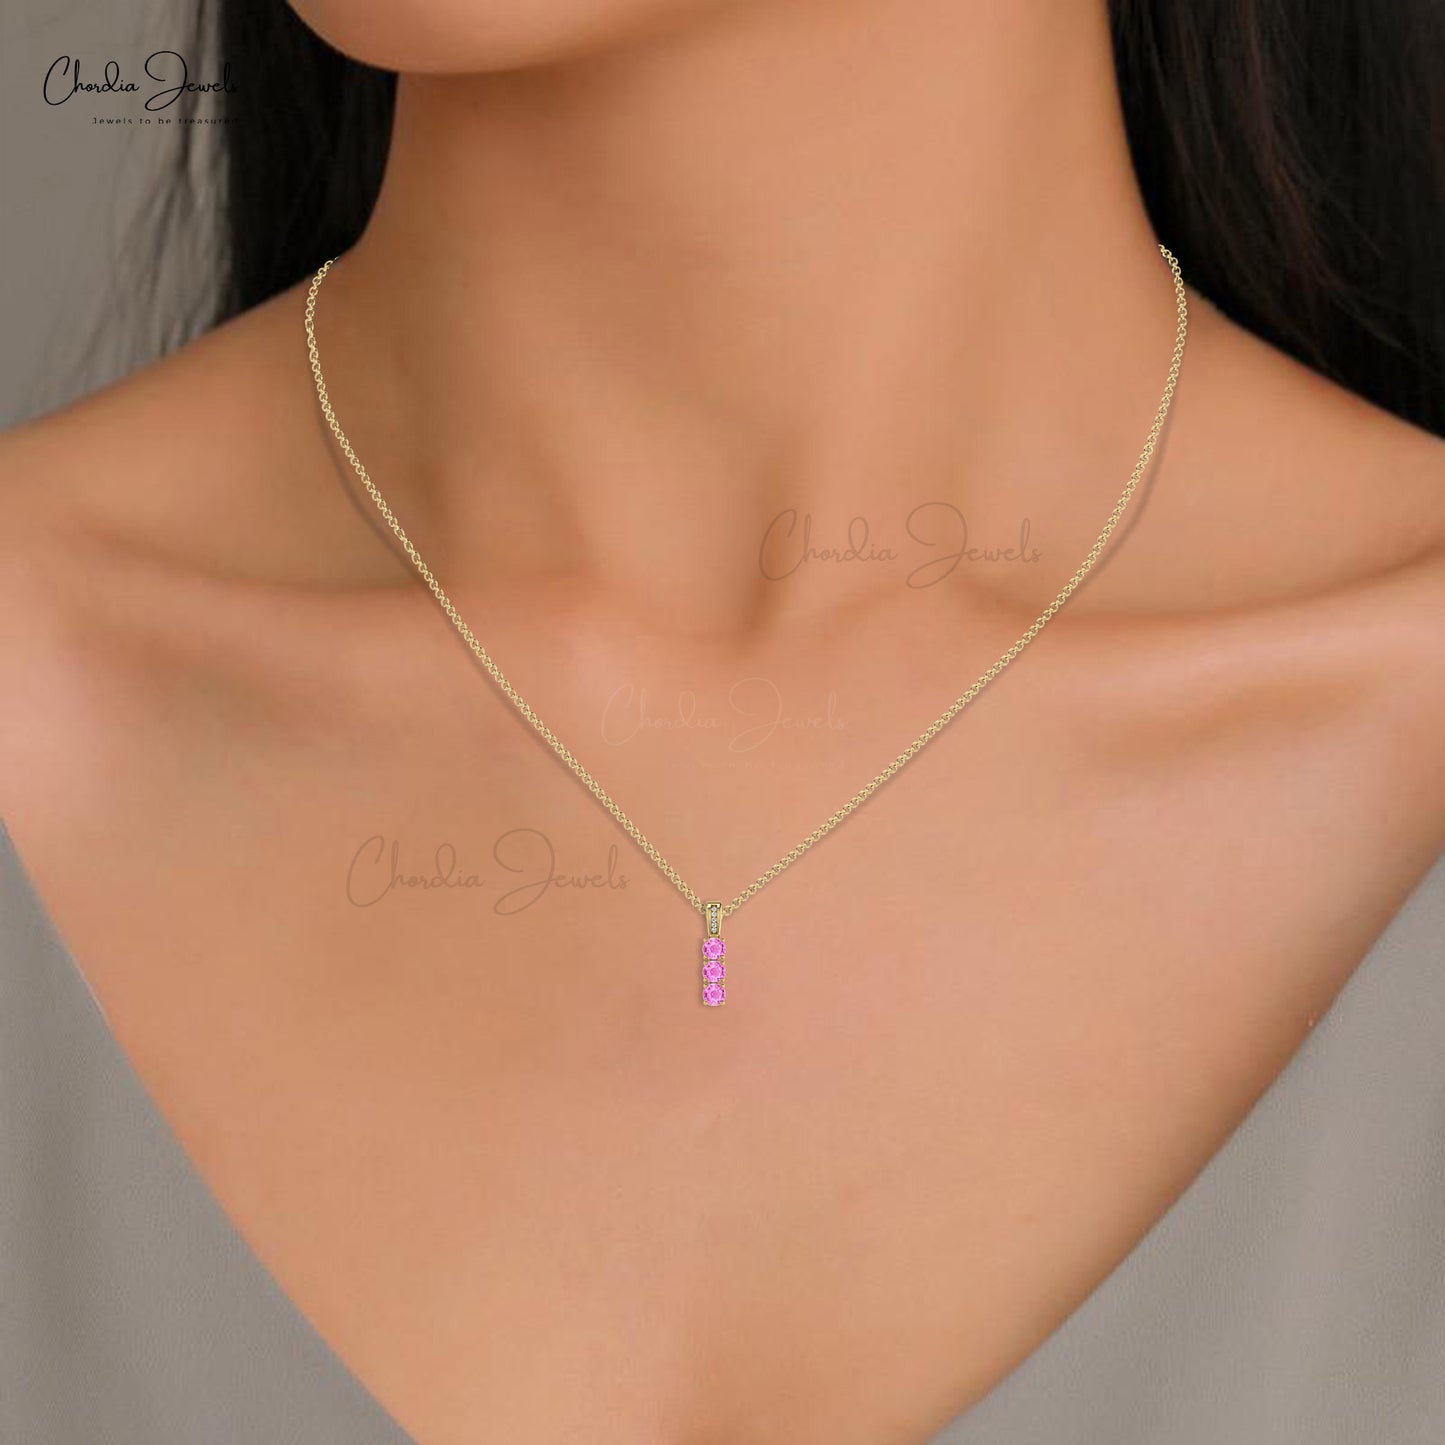 Beautiful 4mm Round Cut Gemstone Pendant Necklace Natural Pink Sapphire 3-Stone Pendant 14k Solid Gold Diamond Jewelry For Engagement Gift